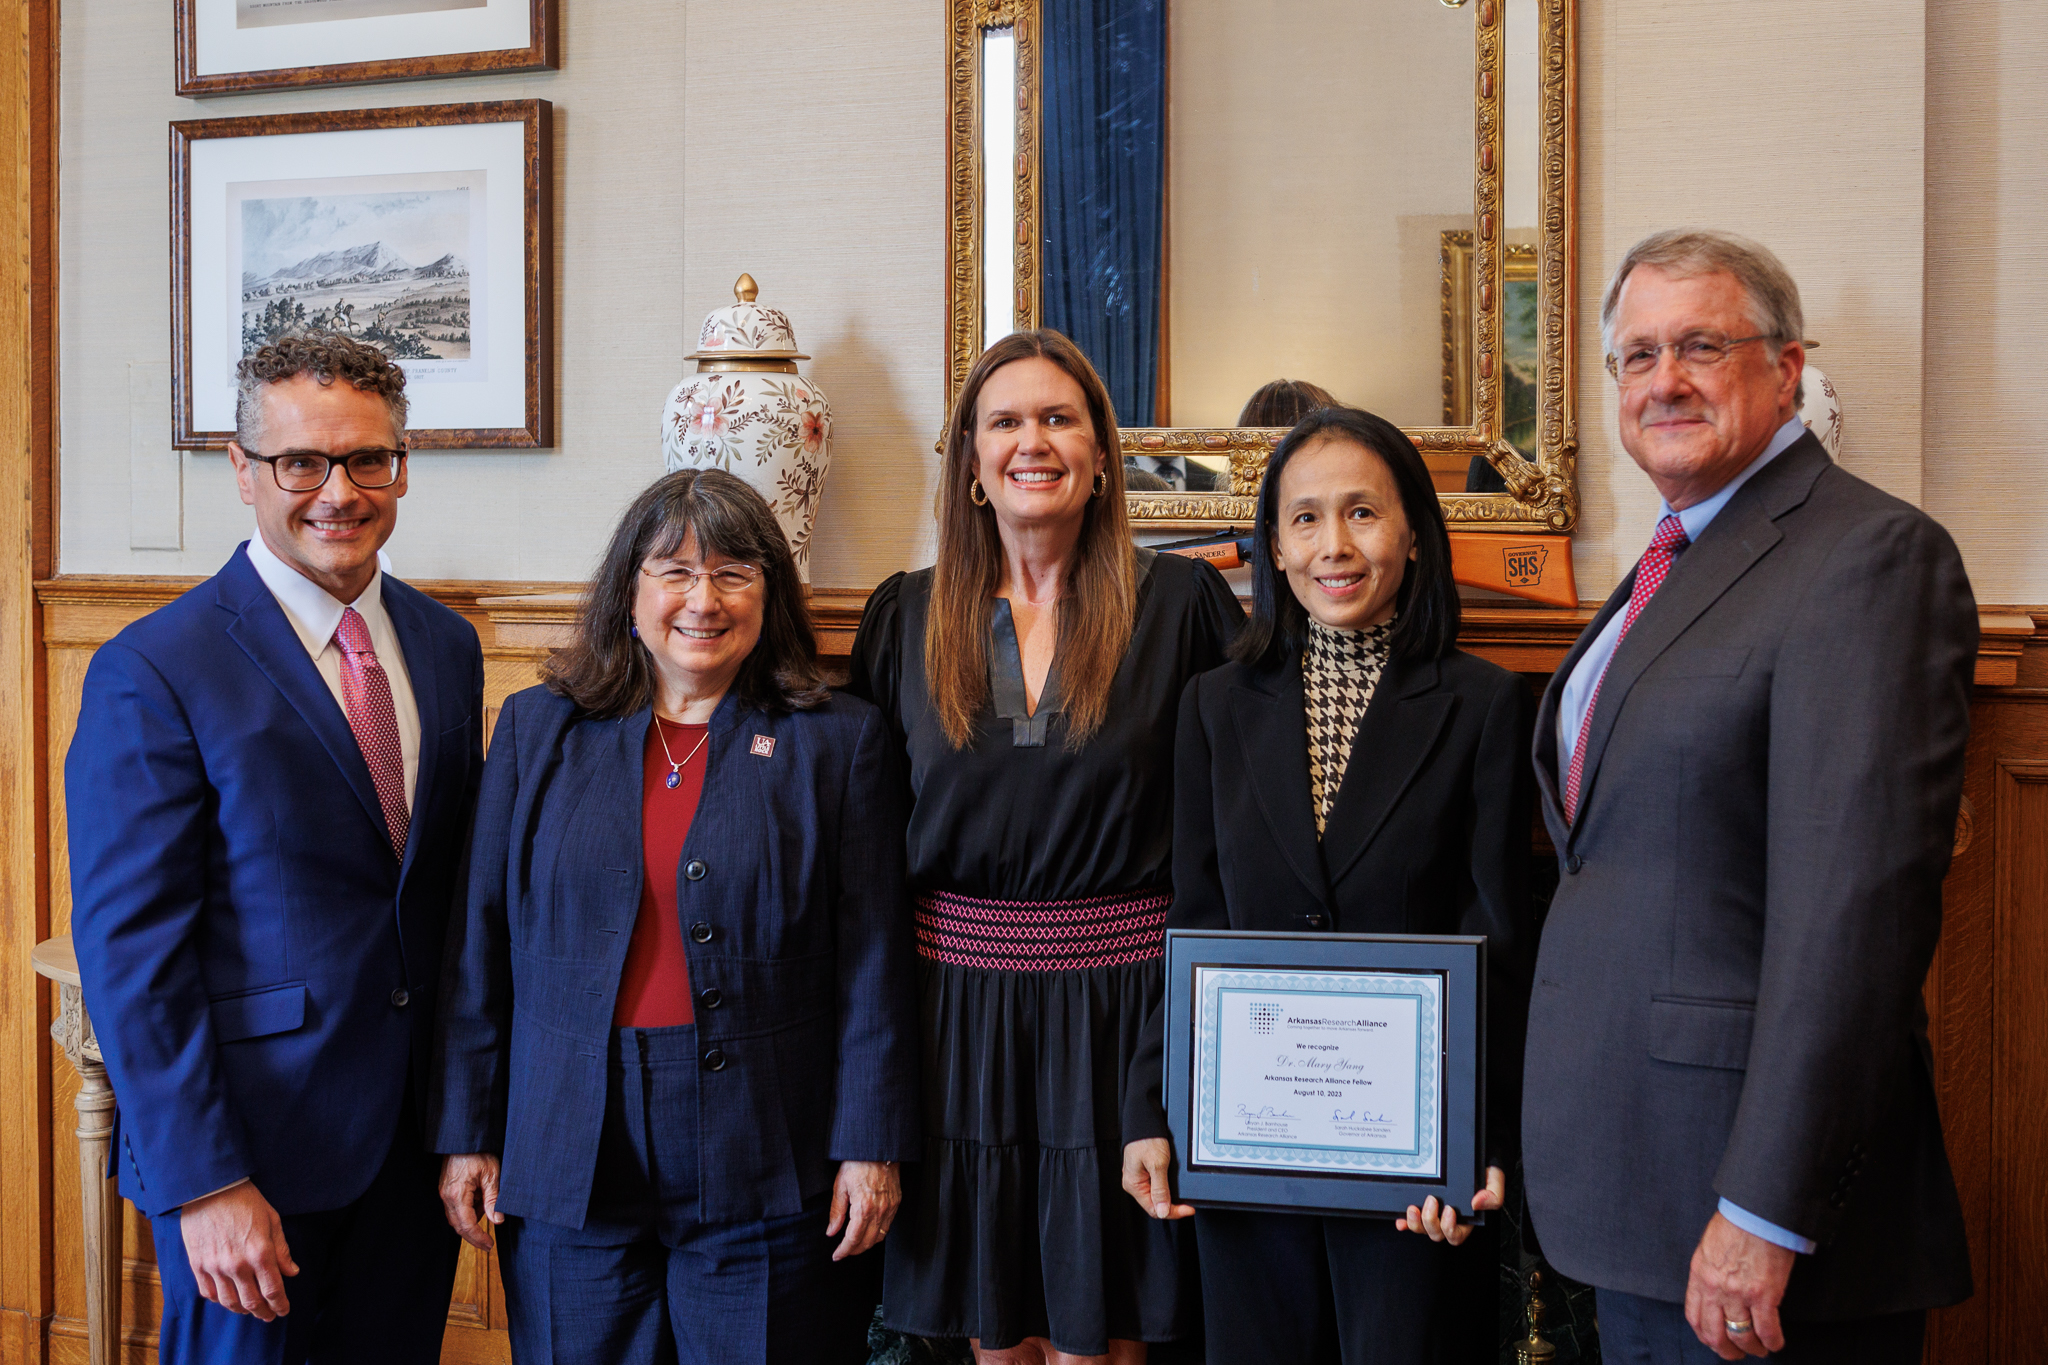 Dr. Mary Yang is inducted into the Arkansas Research Alliance Academy. She is shown with ARA President and CEO Bryan Barnhouse, Chancellor Christina Drale, Governor Sarah Huckabee Sanders, and ARA Chairman Ritter Arnold. Photo by Focus 501.